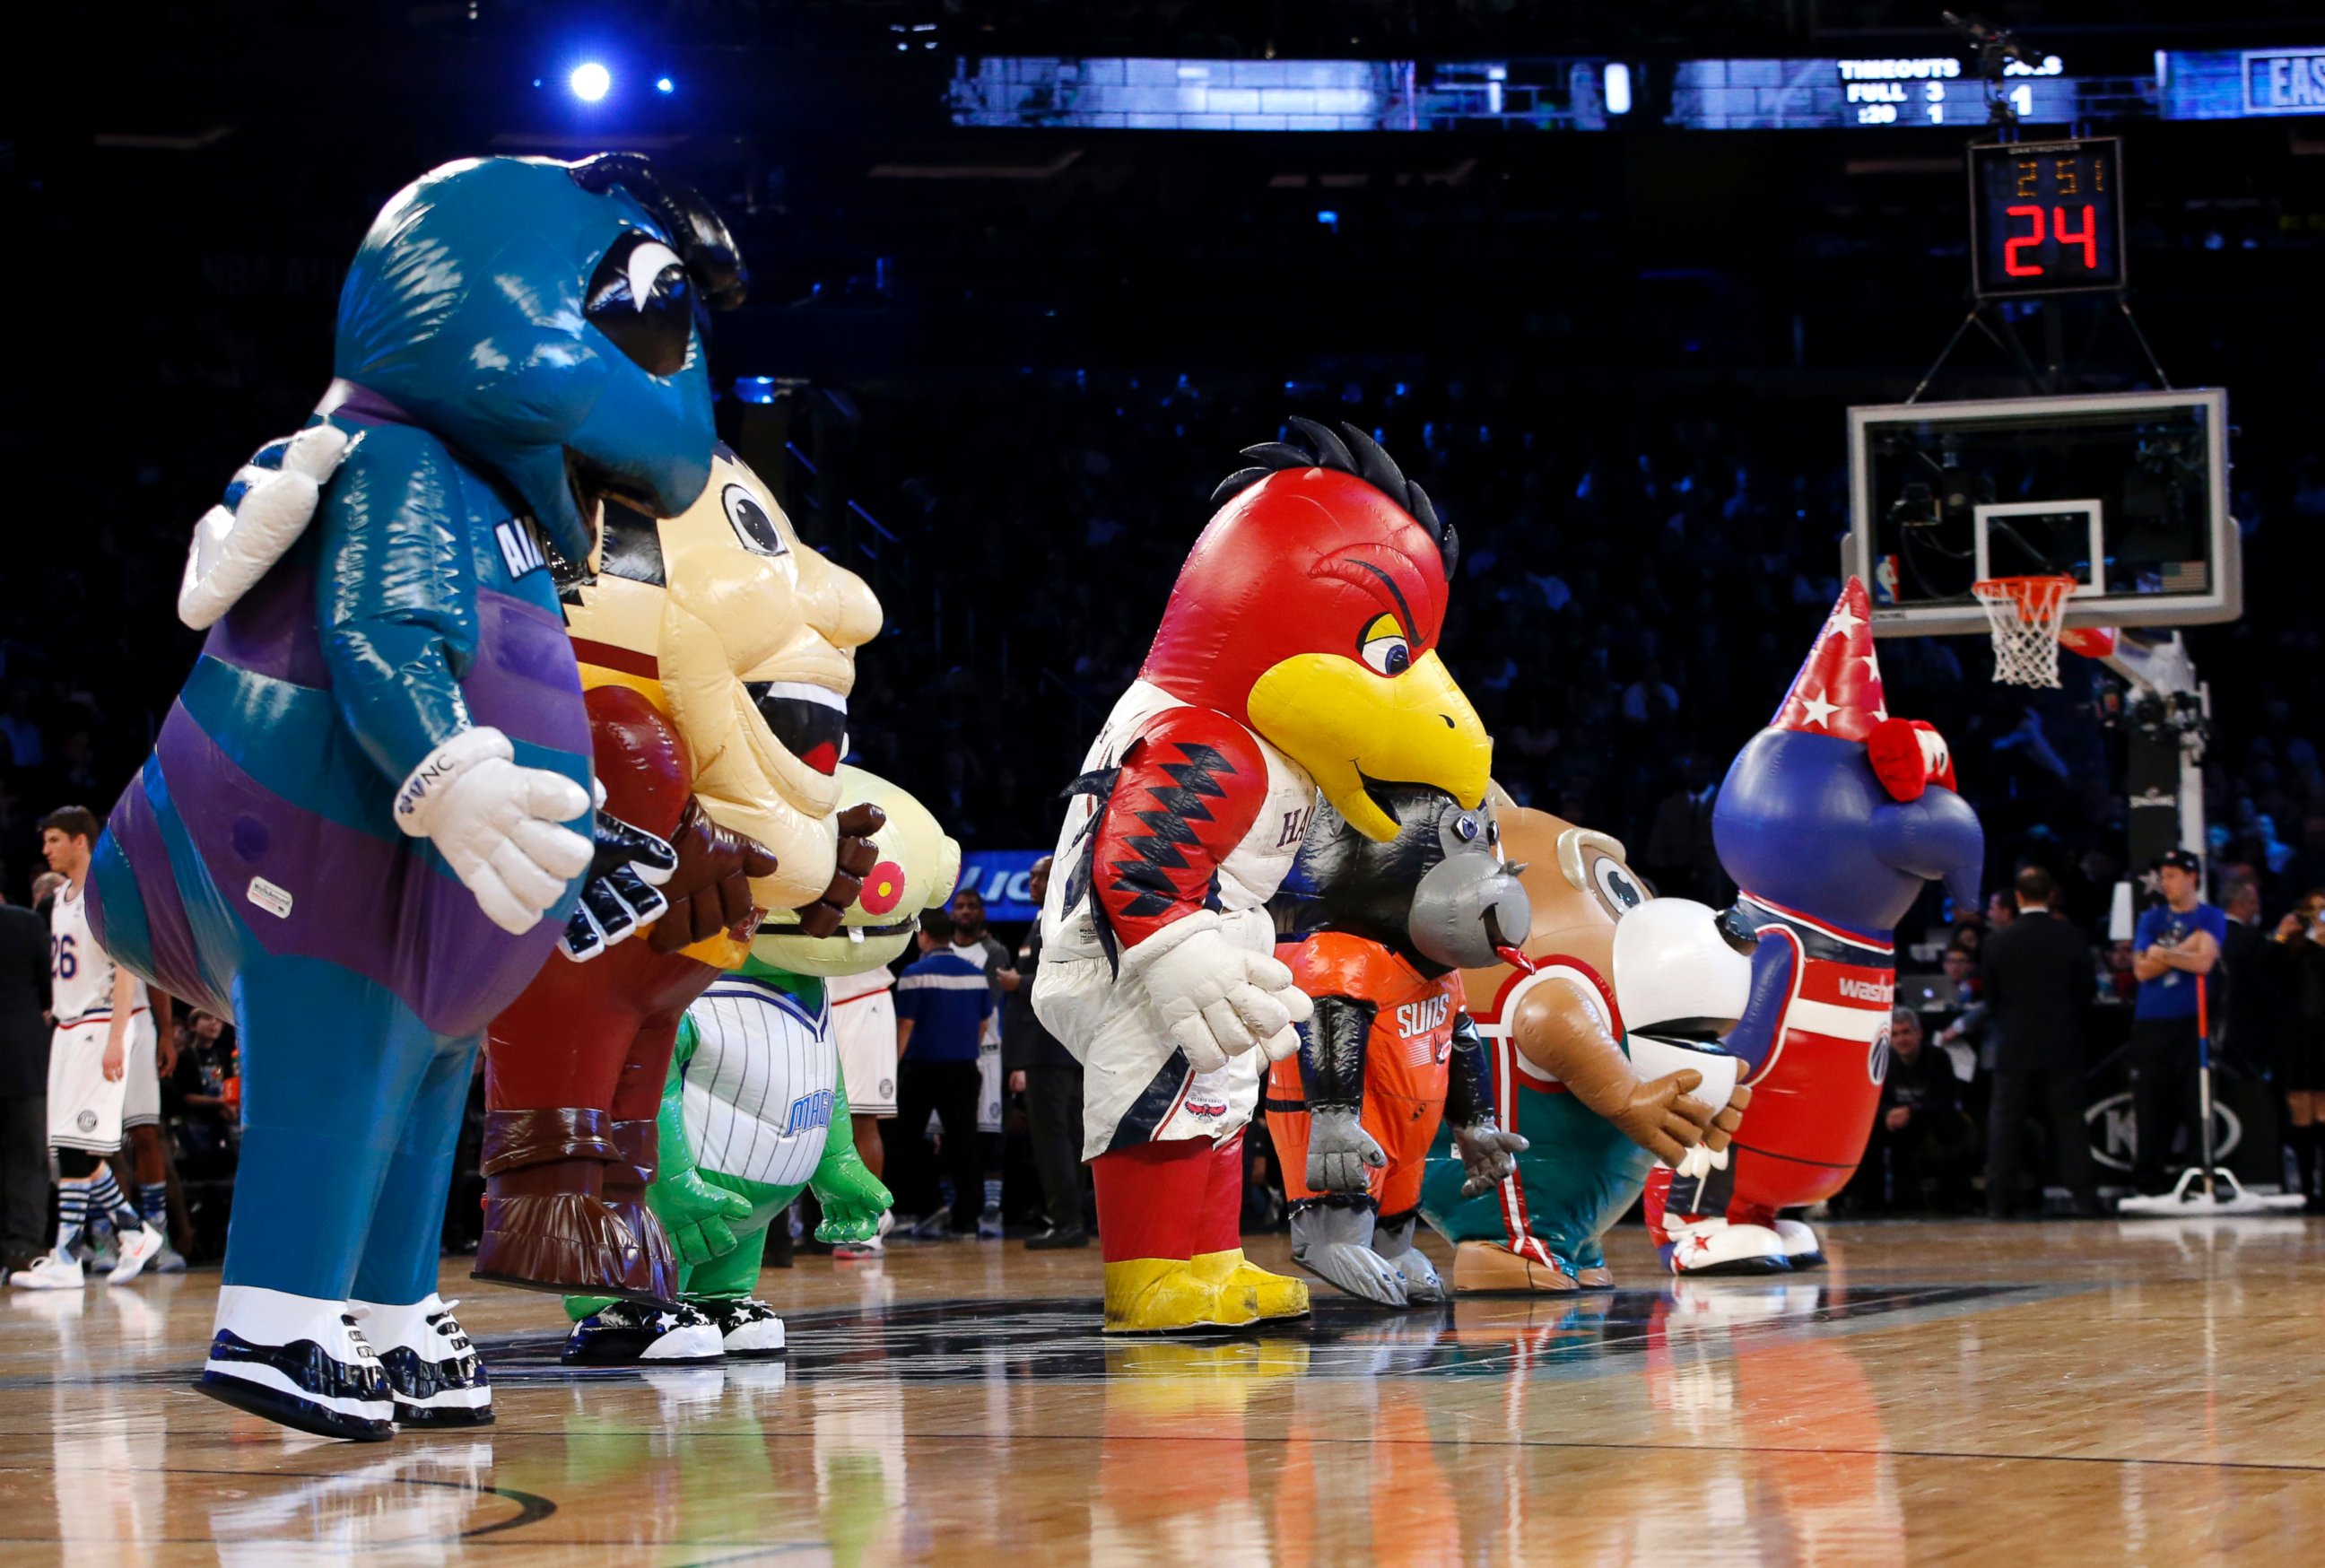 PHOTO: NBA mascots perform during the second half of the NBA All-Star basketball game, Feb. 15, 2015, in New York.